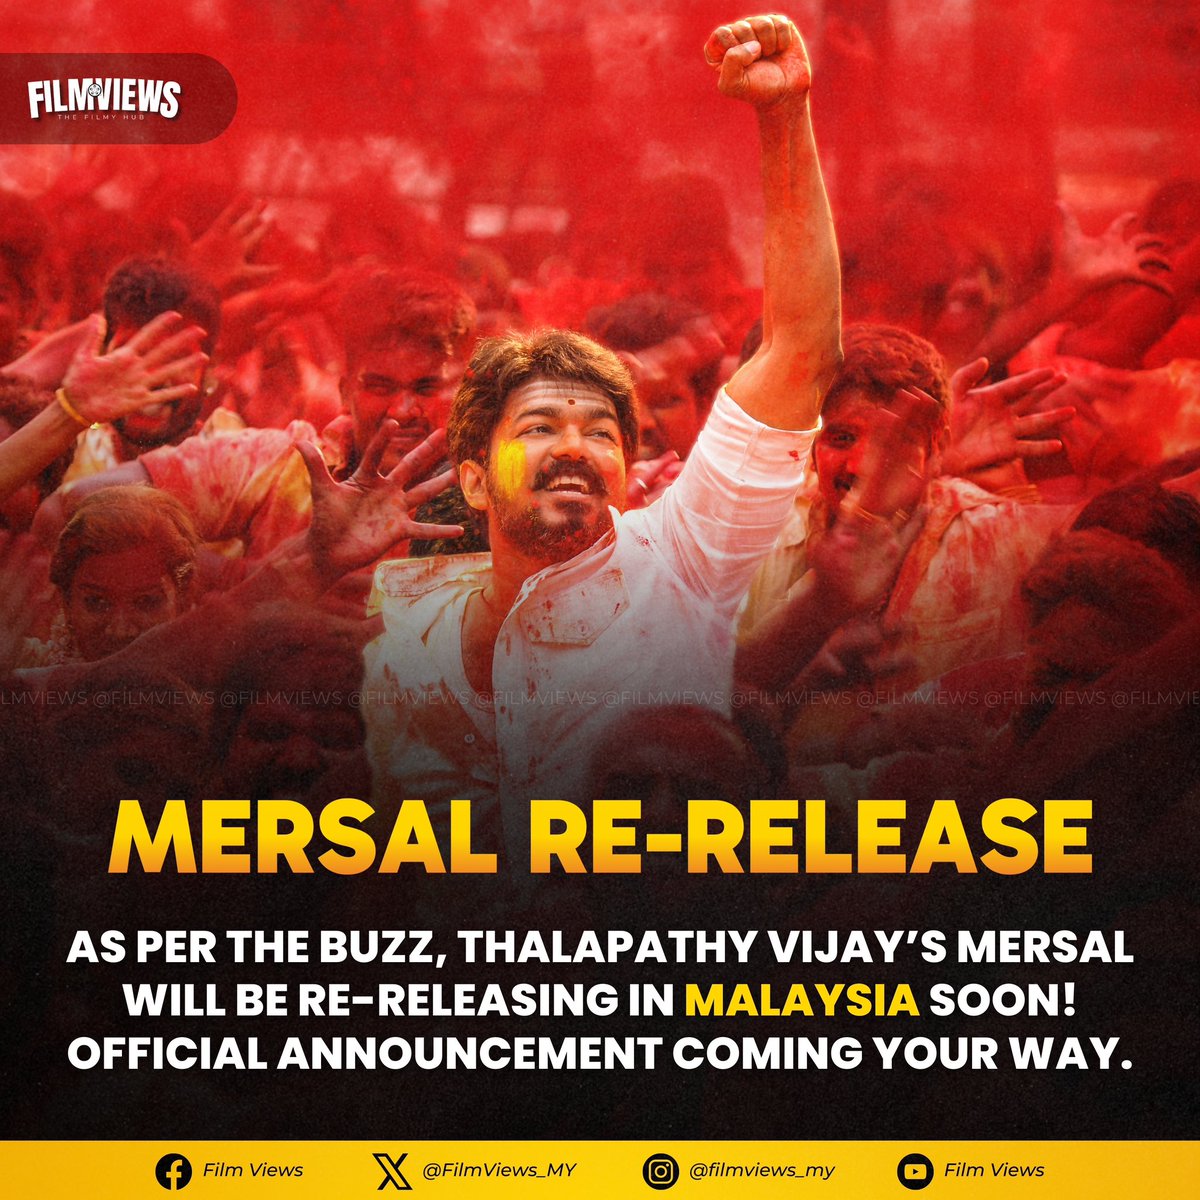 MERSAL ARASAN VARAAN 🥁‼️ As per the buzz, Thalapathy Vijay’s Mersal will be re-releasing in Malaysia soon 🇲🇾 Thalapathy Fans, are you ready ? #MersalReRelease #ThalapathyVijay #Vijay #GOAT @TeamMVF